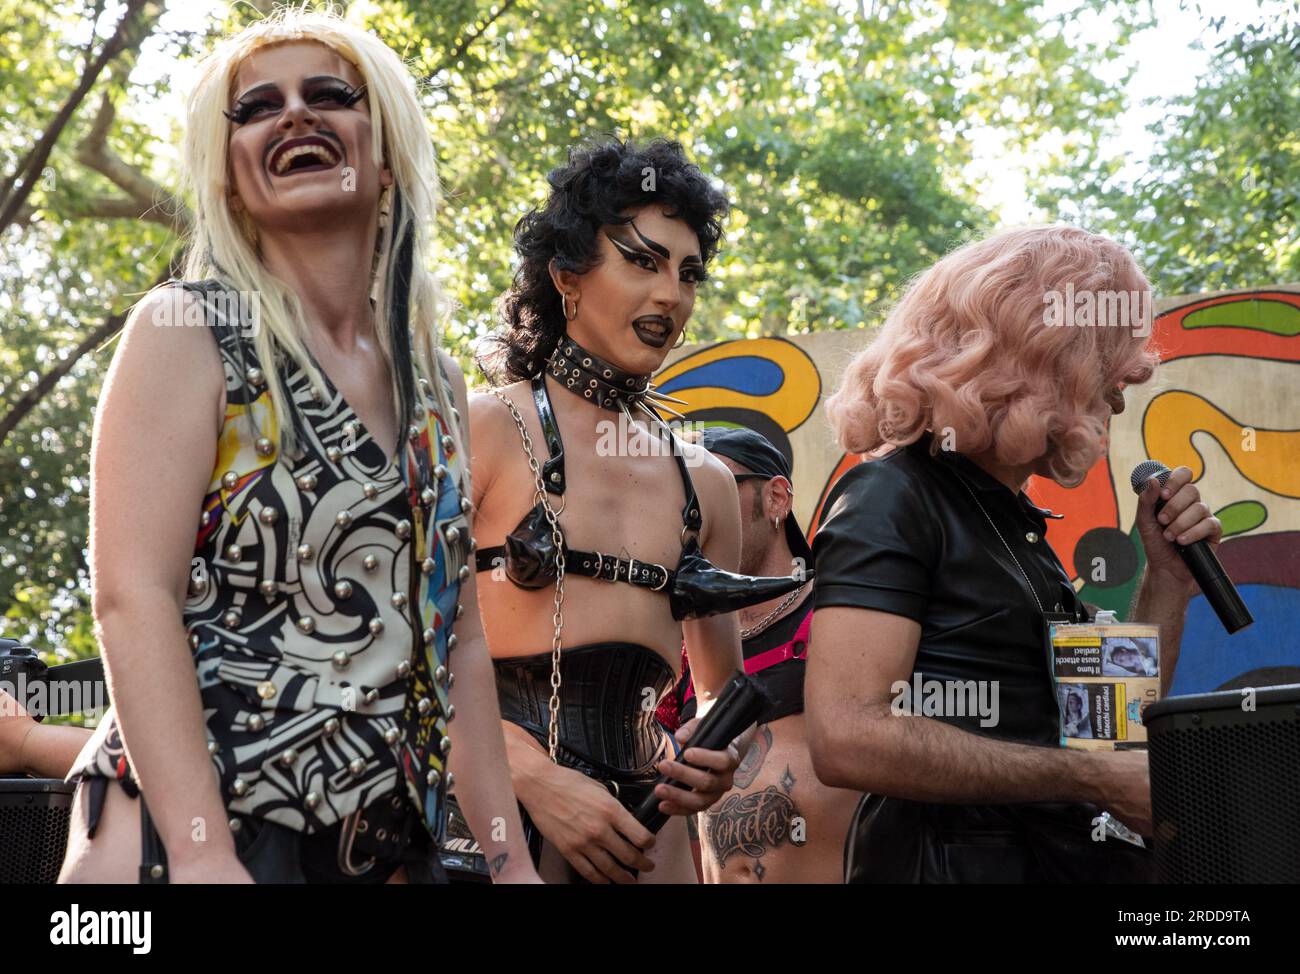 Unidentified participants in extravagant costumes, during the Toscana Pride LGBTQ parade. Stock Photo